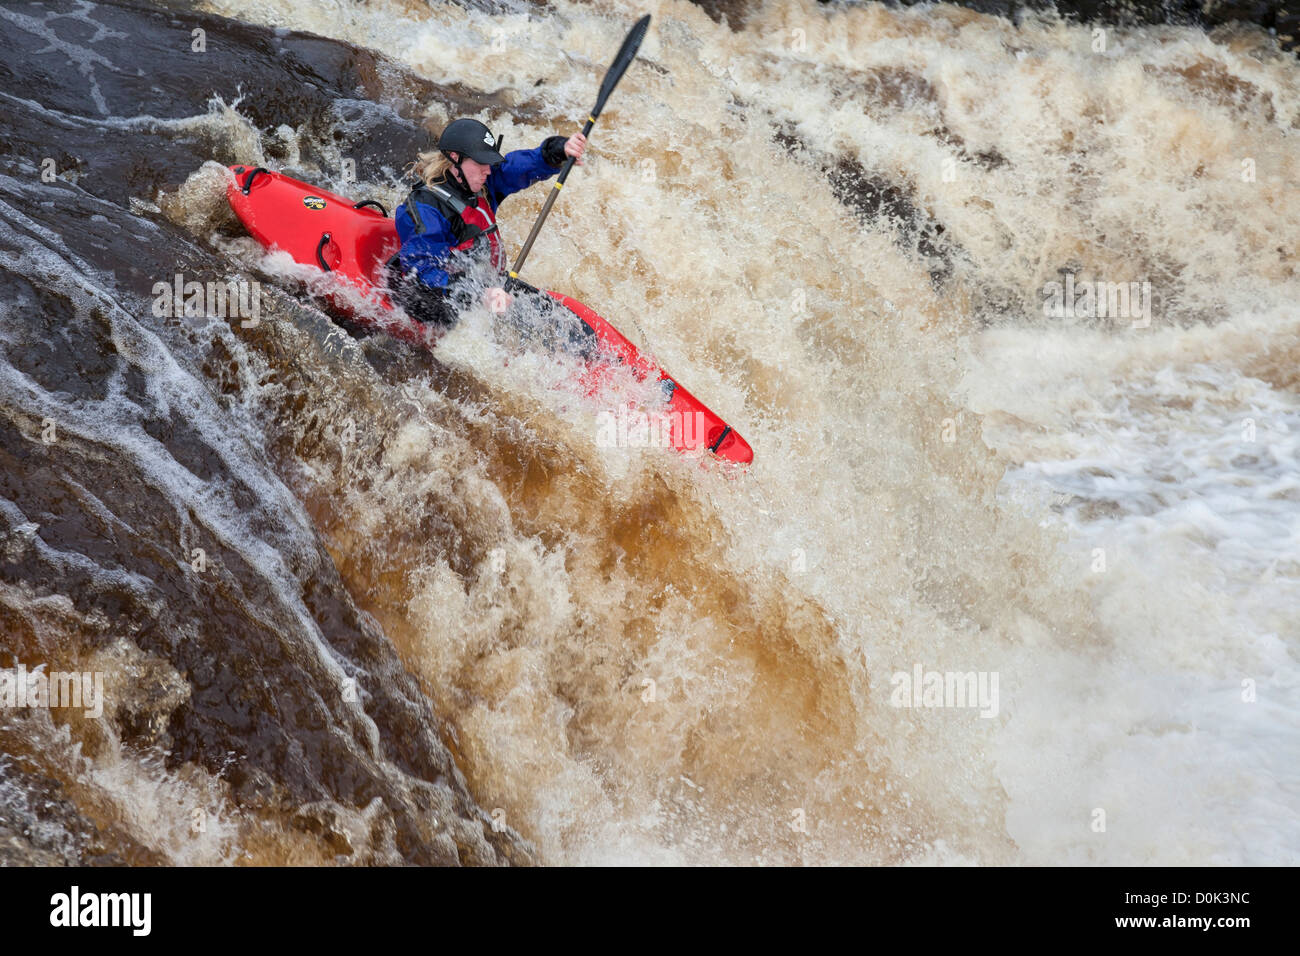 Canoeist Tackling Low Force Waterfall in High Flow Conditions River Tees Bowlees Upper Teesdale County Durham UK Stock Photo